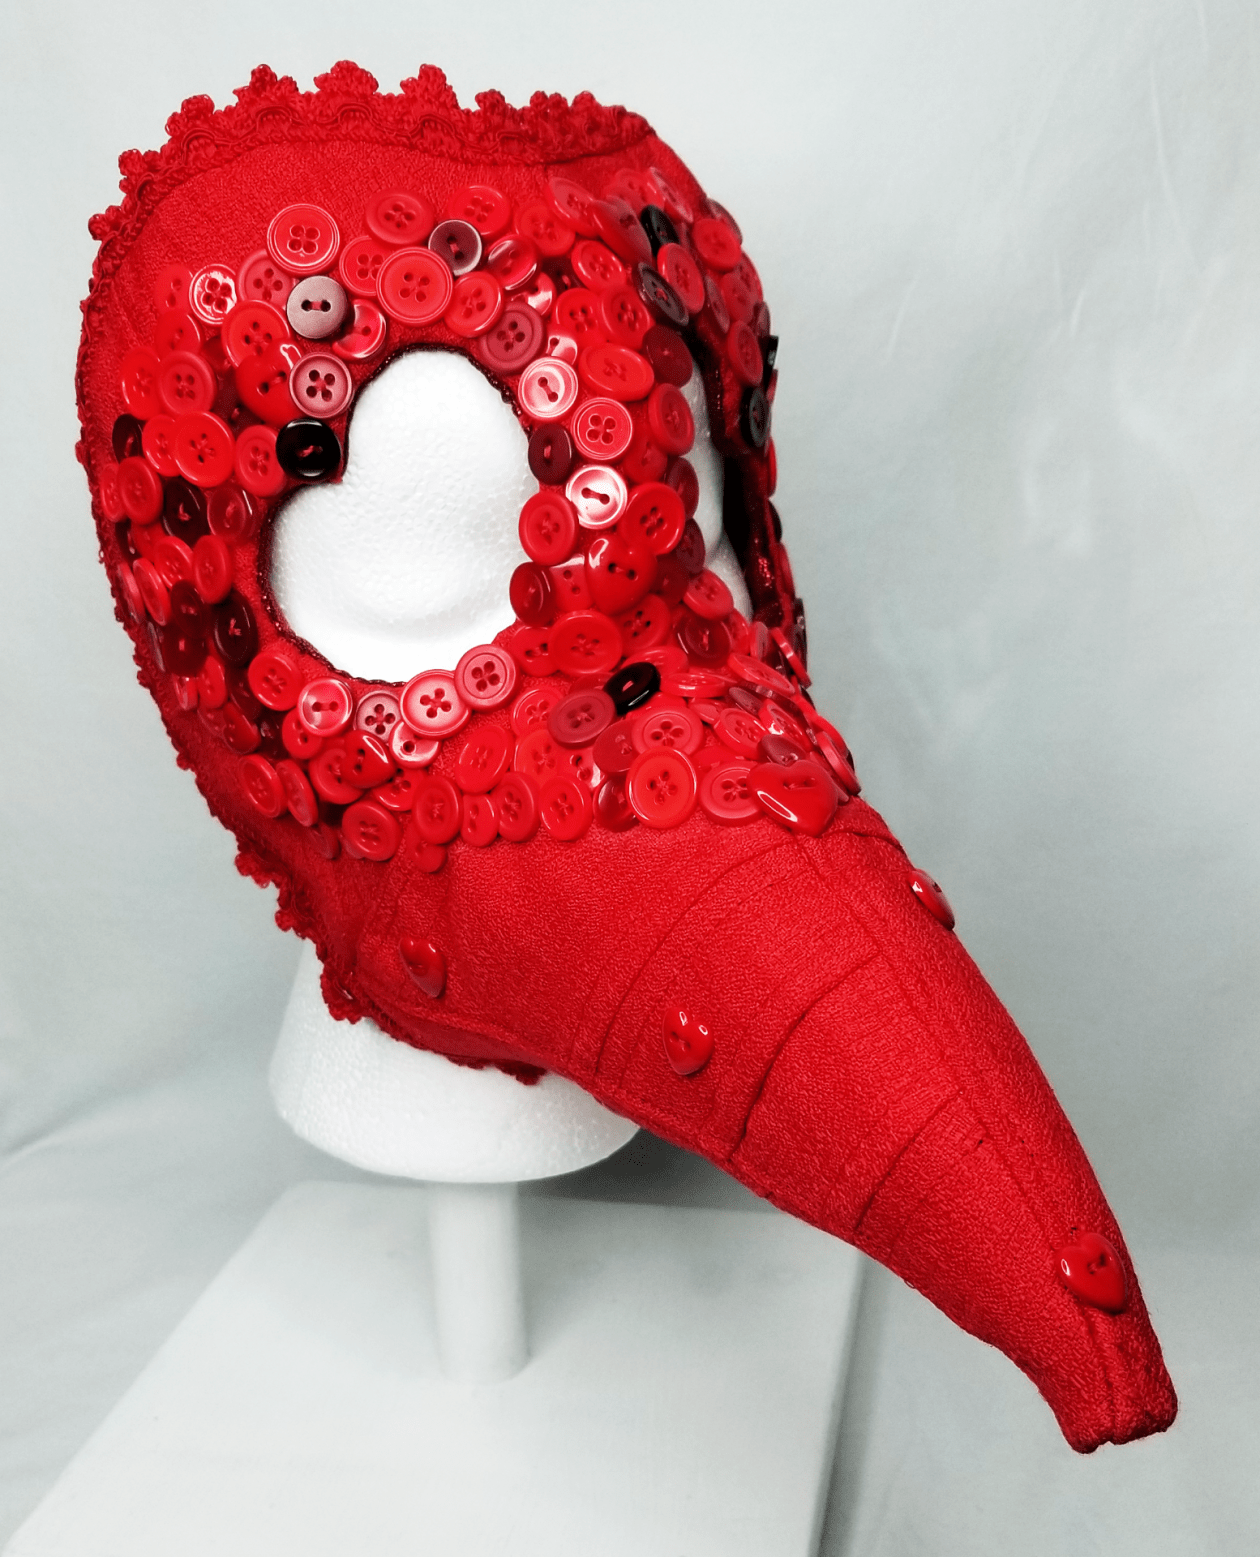 A red beaked mask with button embellishments